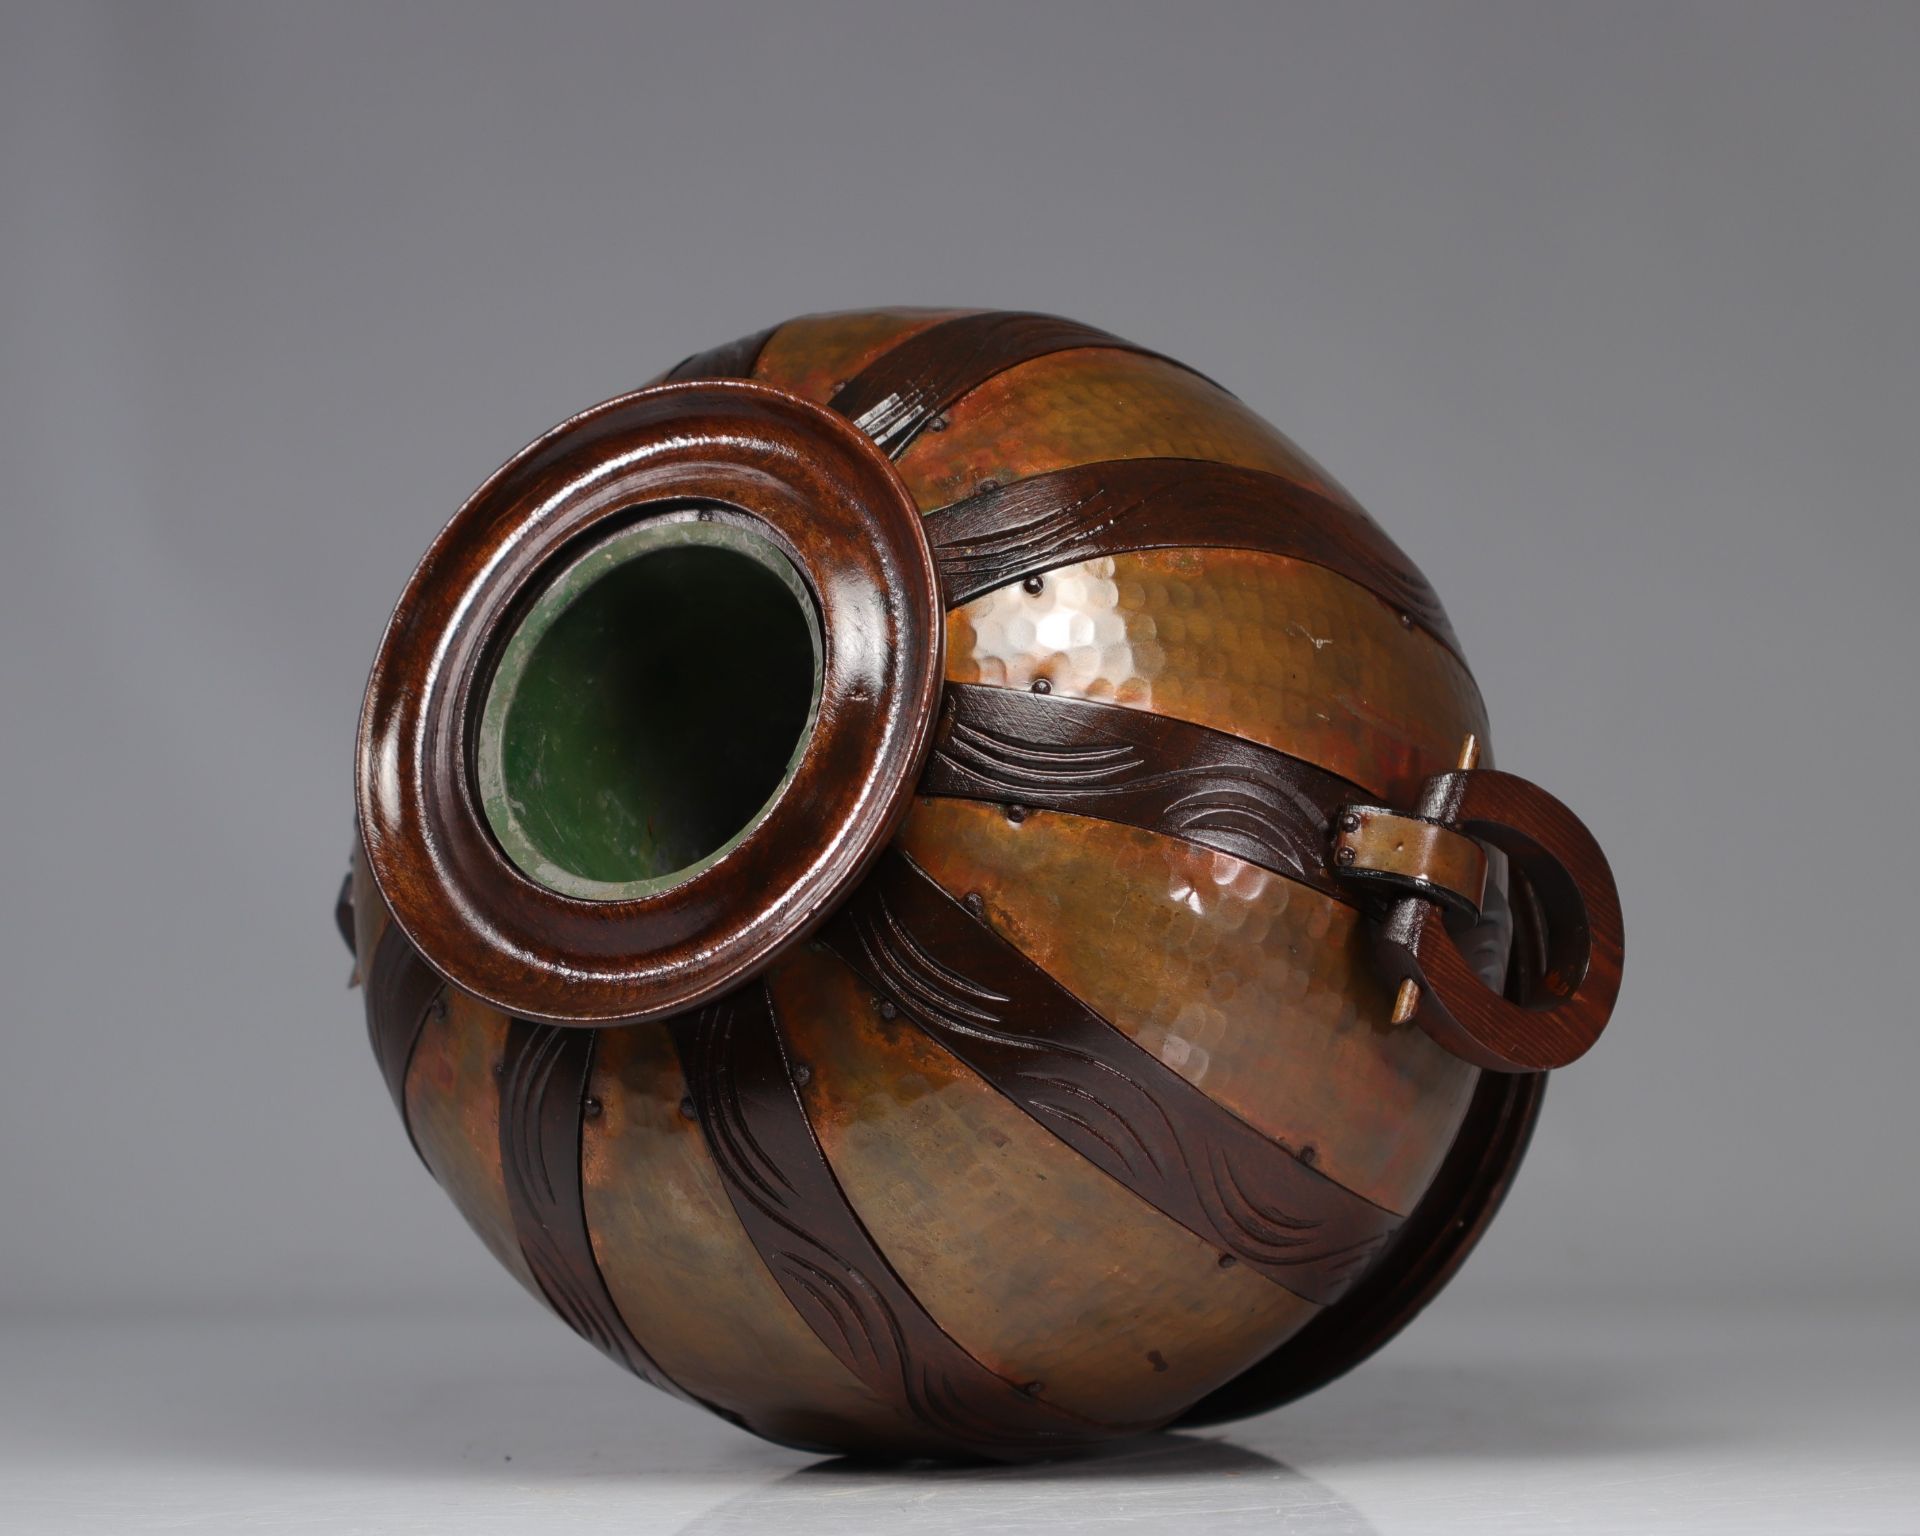 Gustave SERRURIER-BOVY (1858-1910) Hammered copper and wood ball vase - Image 3 of 3